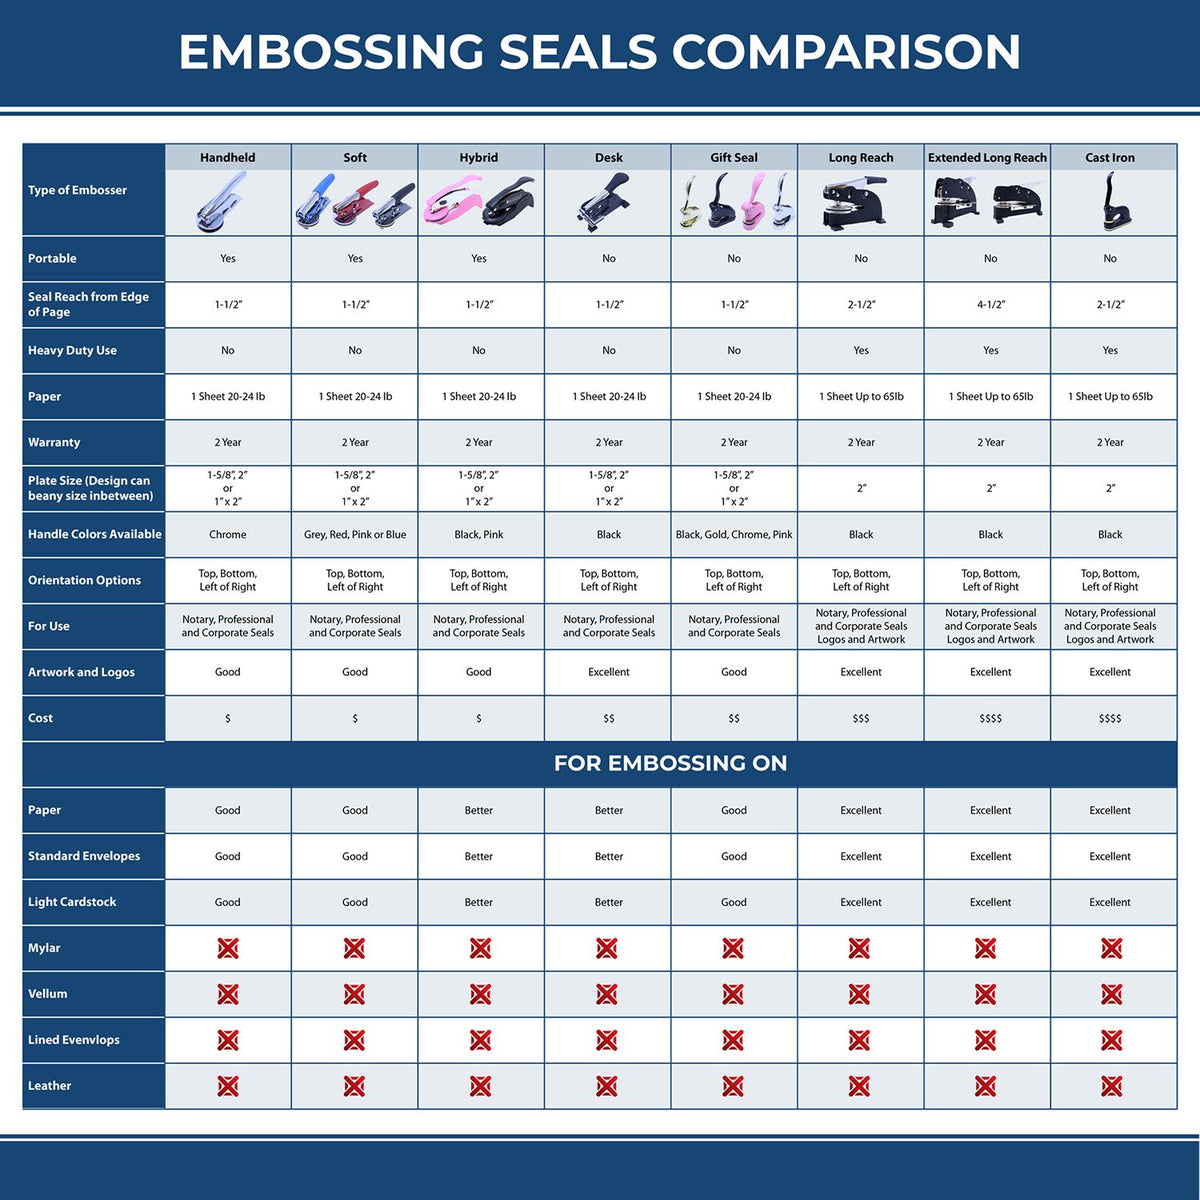 A comparison chart for the different types of mount models available for the Heavy Duty Cast Iron Florida Land Surveyor Seal Embosser.